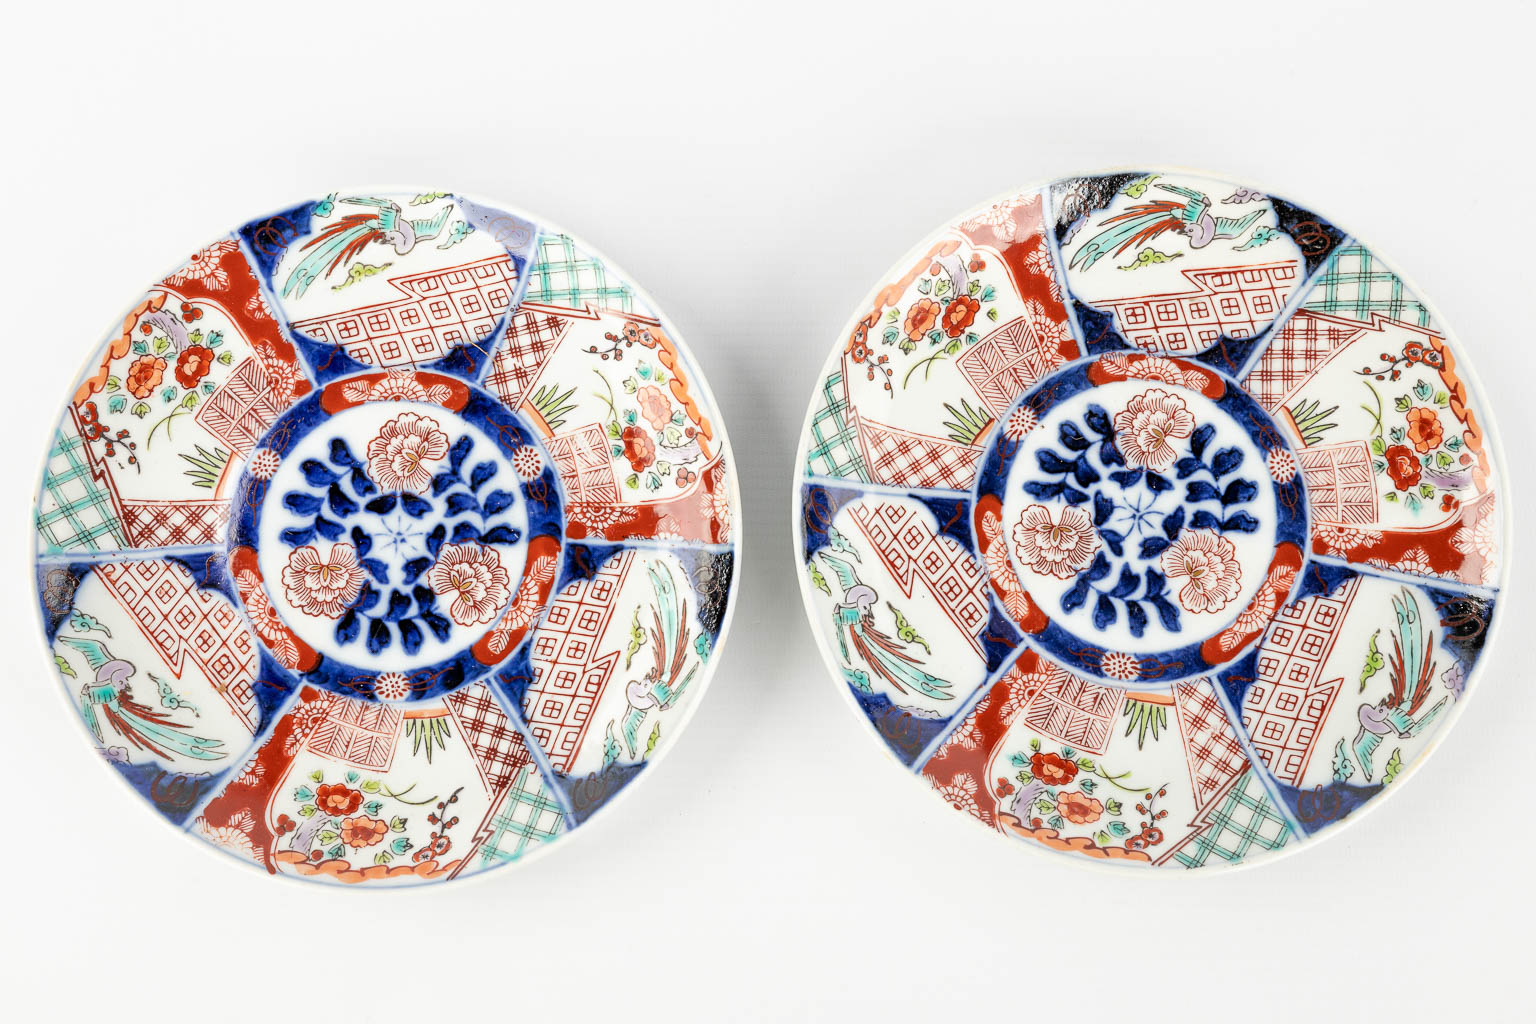 An assembled collection of Japanese Imari and Kutani porcelain. 19th/20th century. (H: 35 x D: 19 cm)